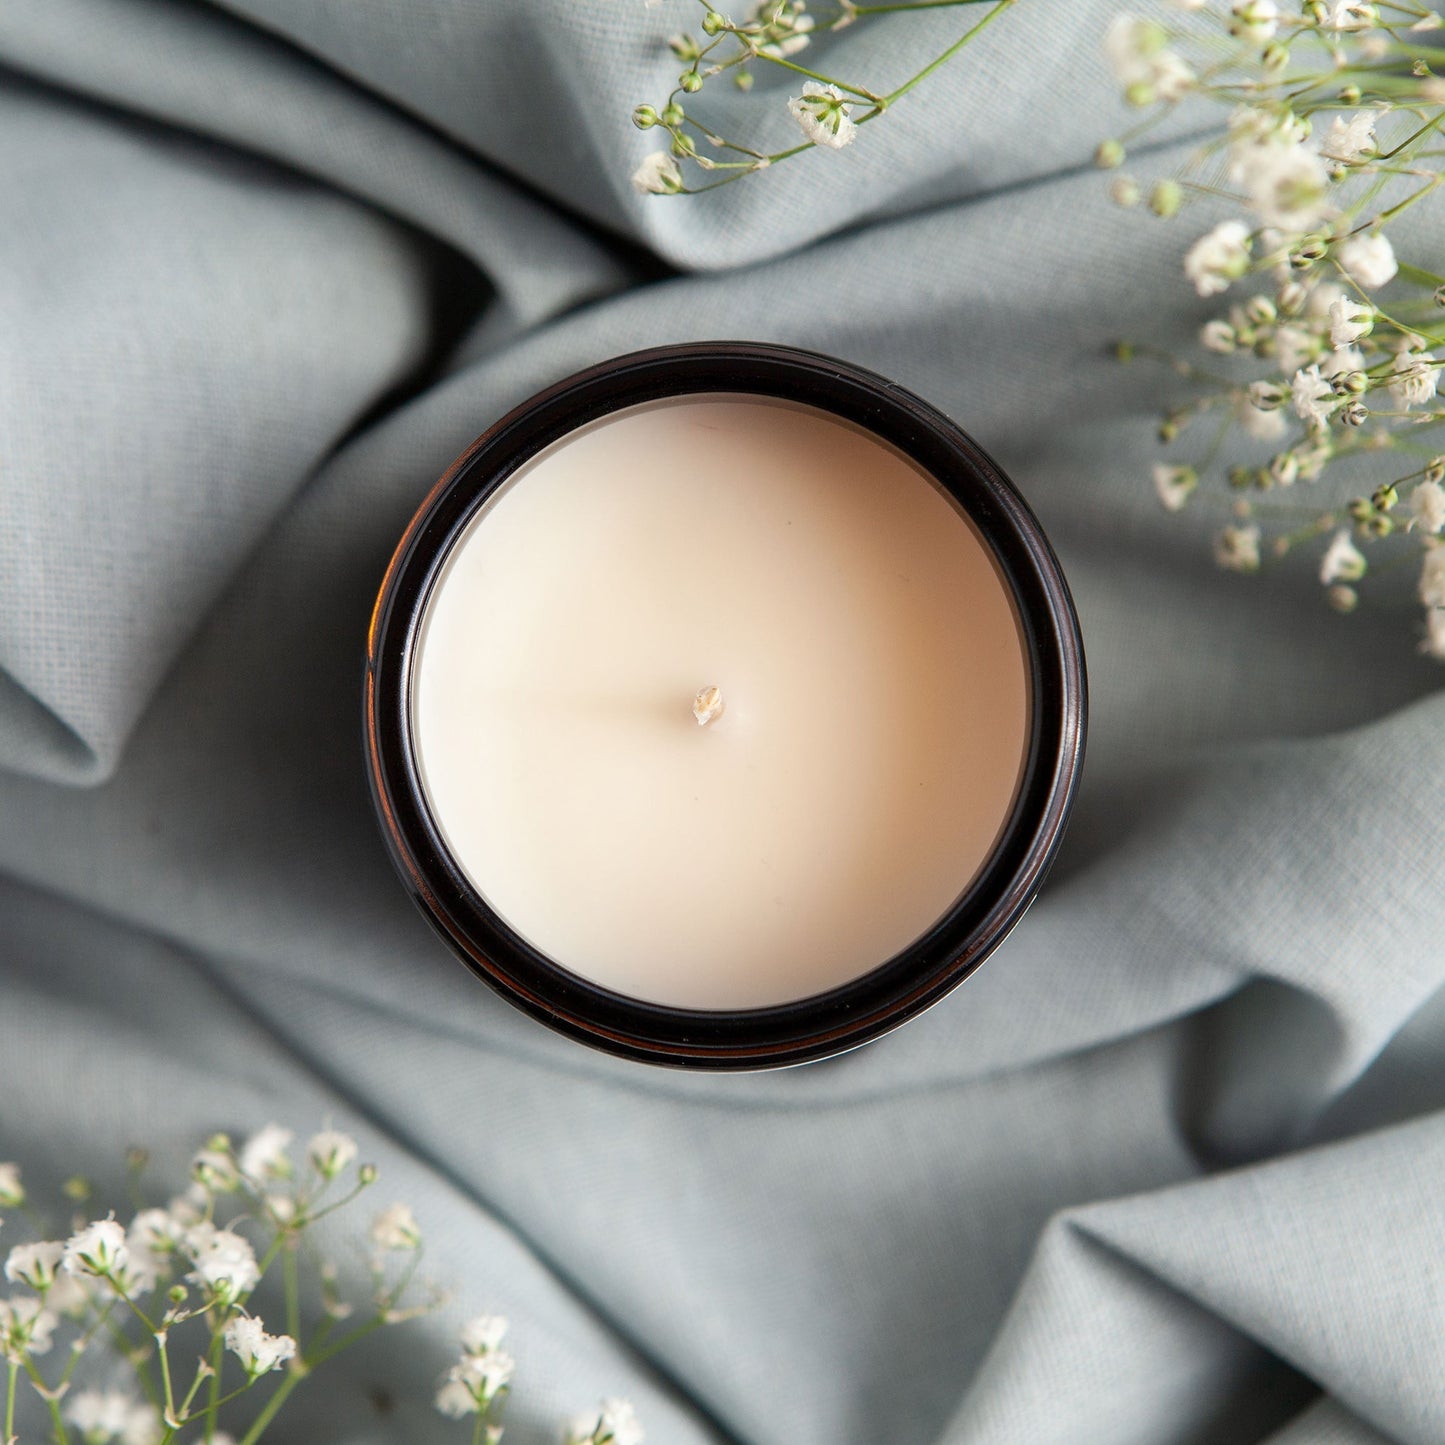 Aromatherapy Candles - Sleep, De-stress, Happiness, Immunity, Focus, Meditation, Energy - Kindred Fires